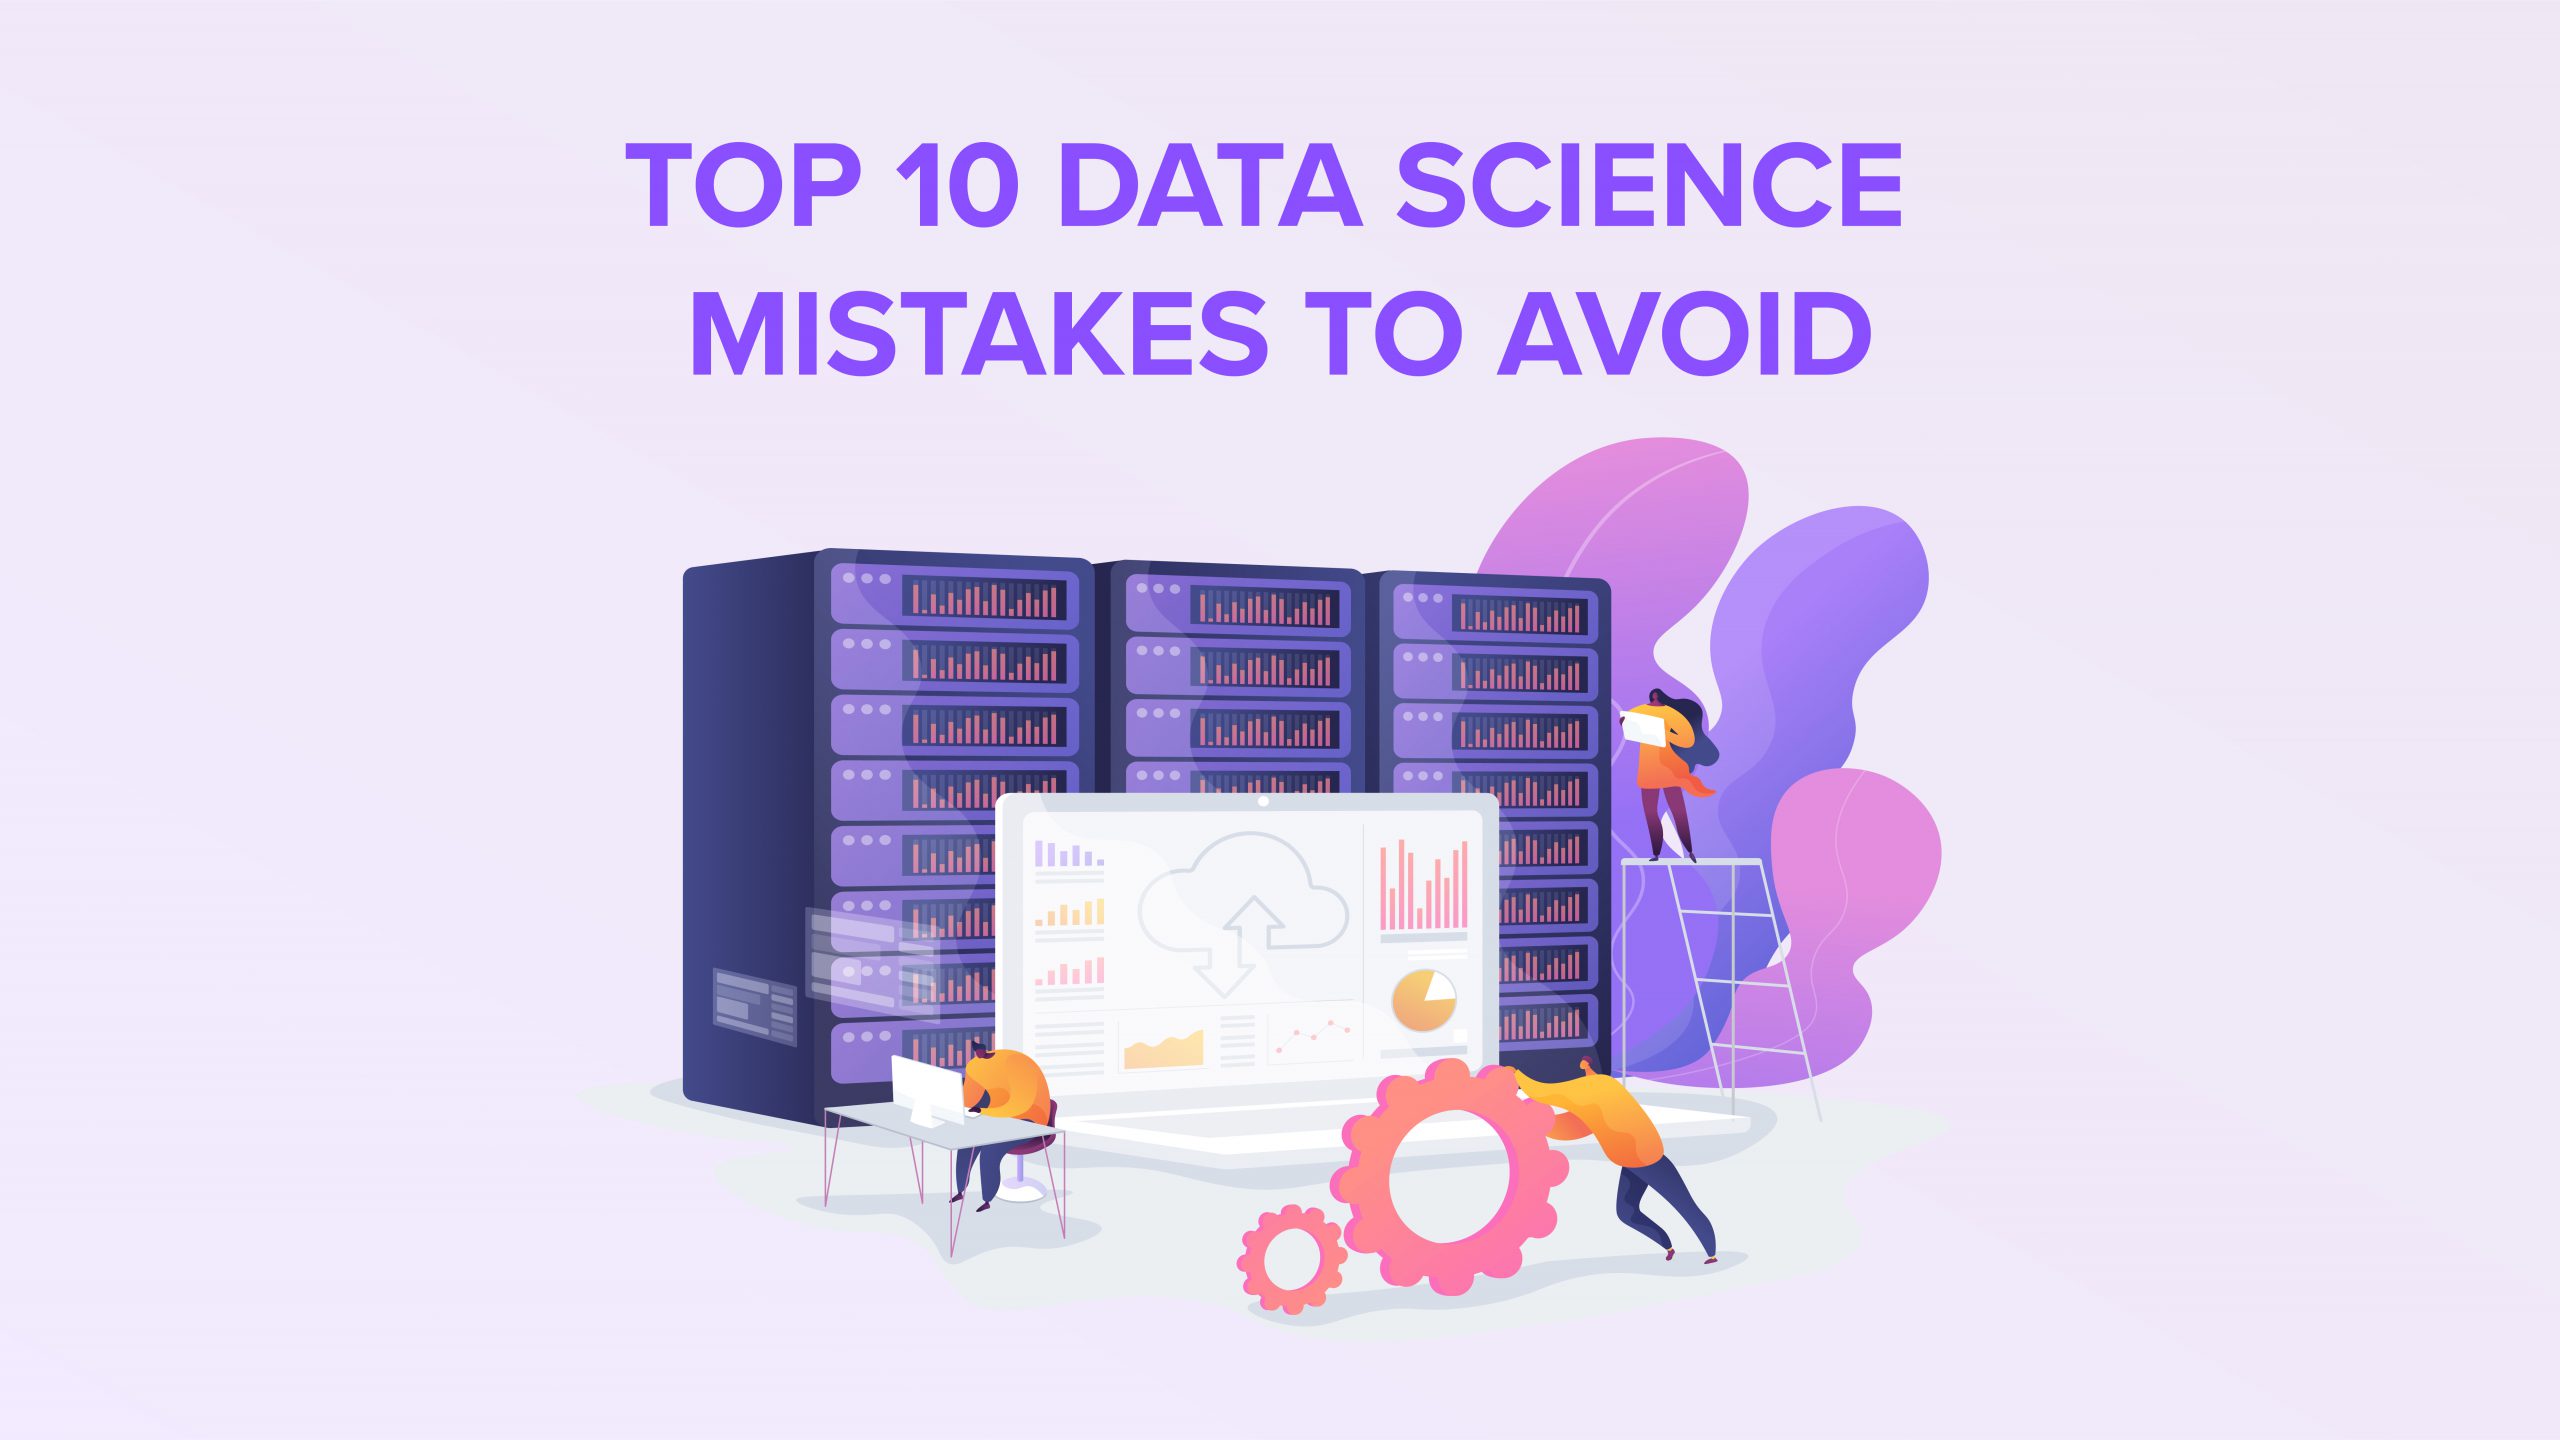 The Top 10 Data Science Mistakes to Avoid